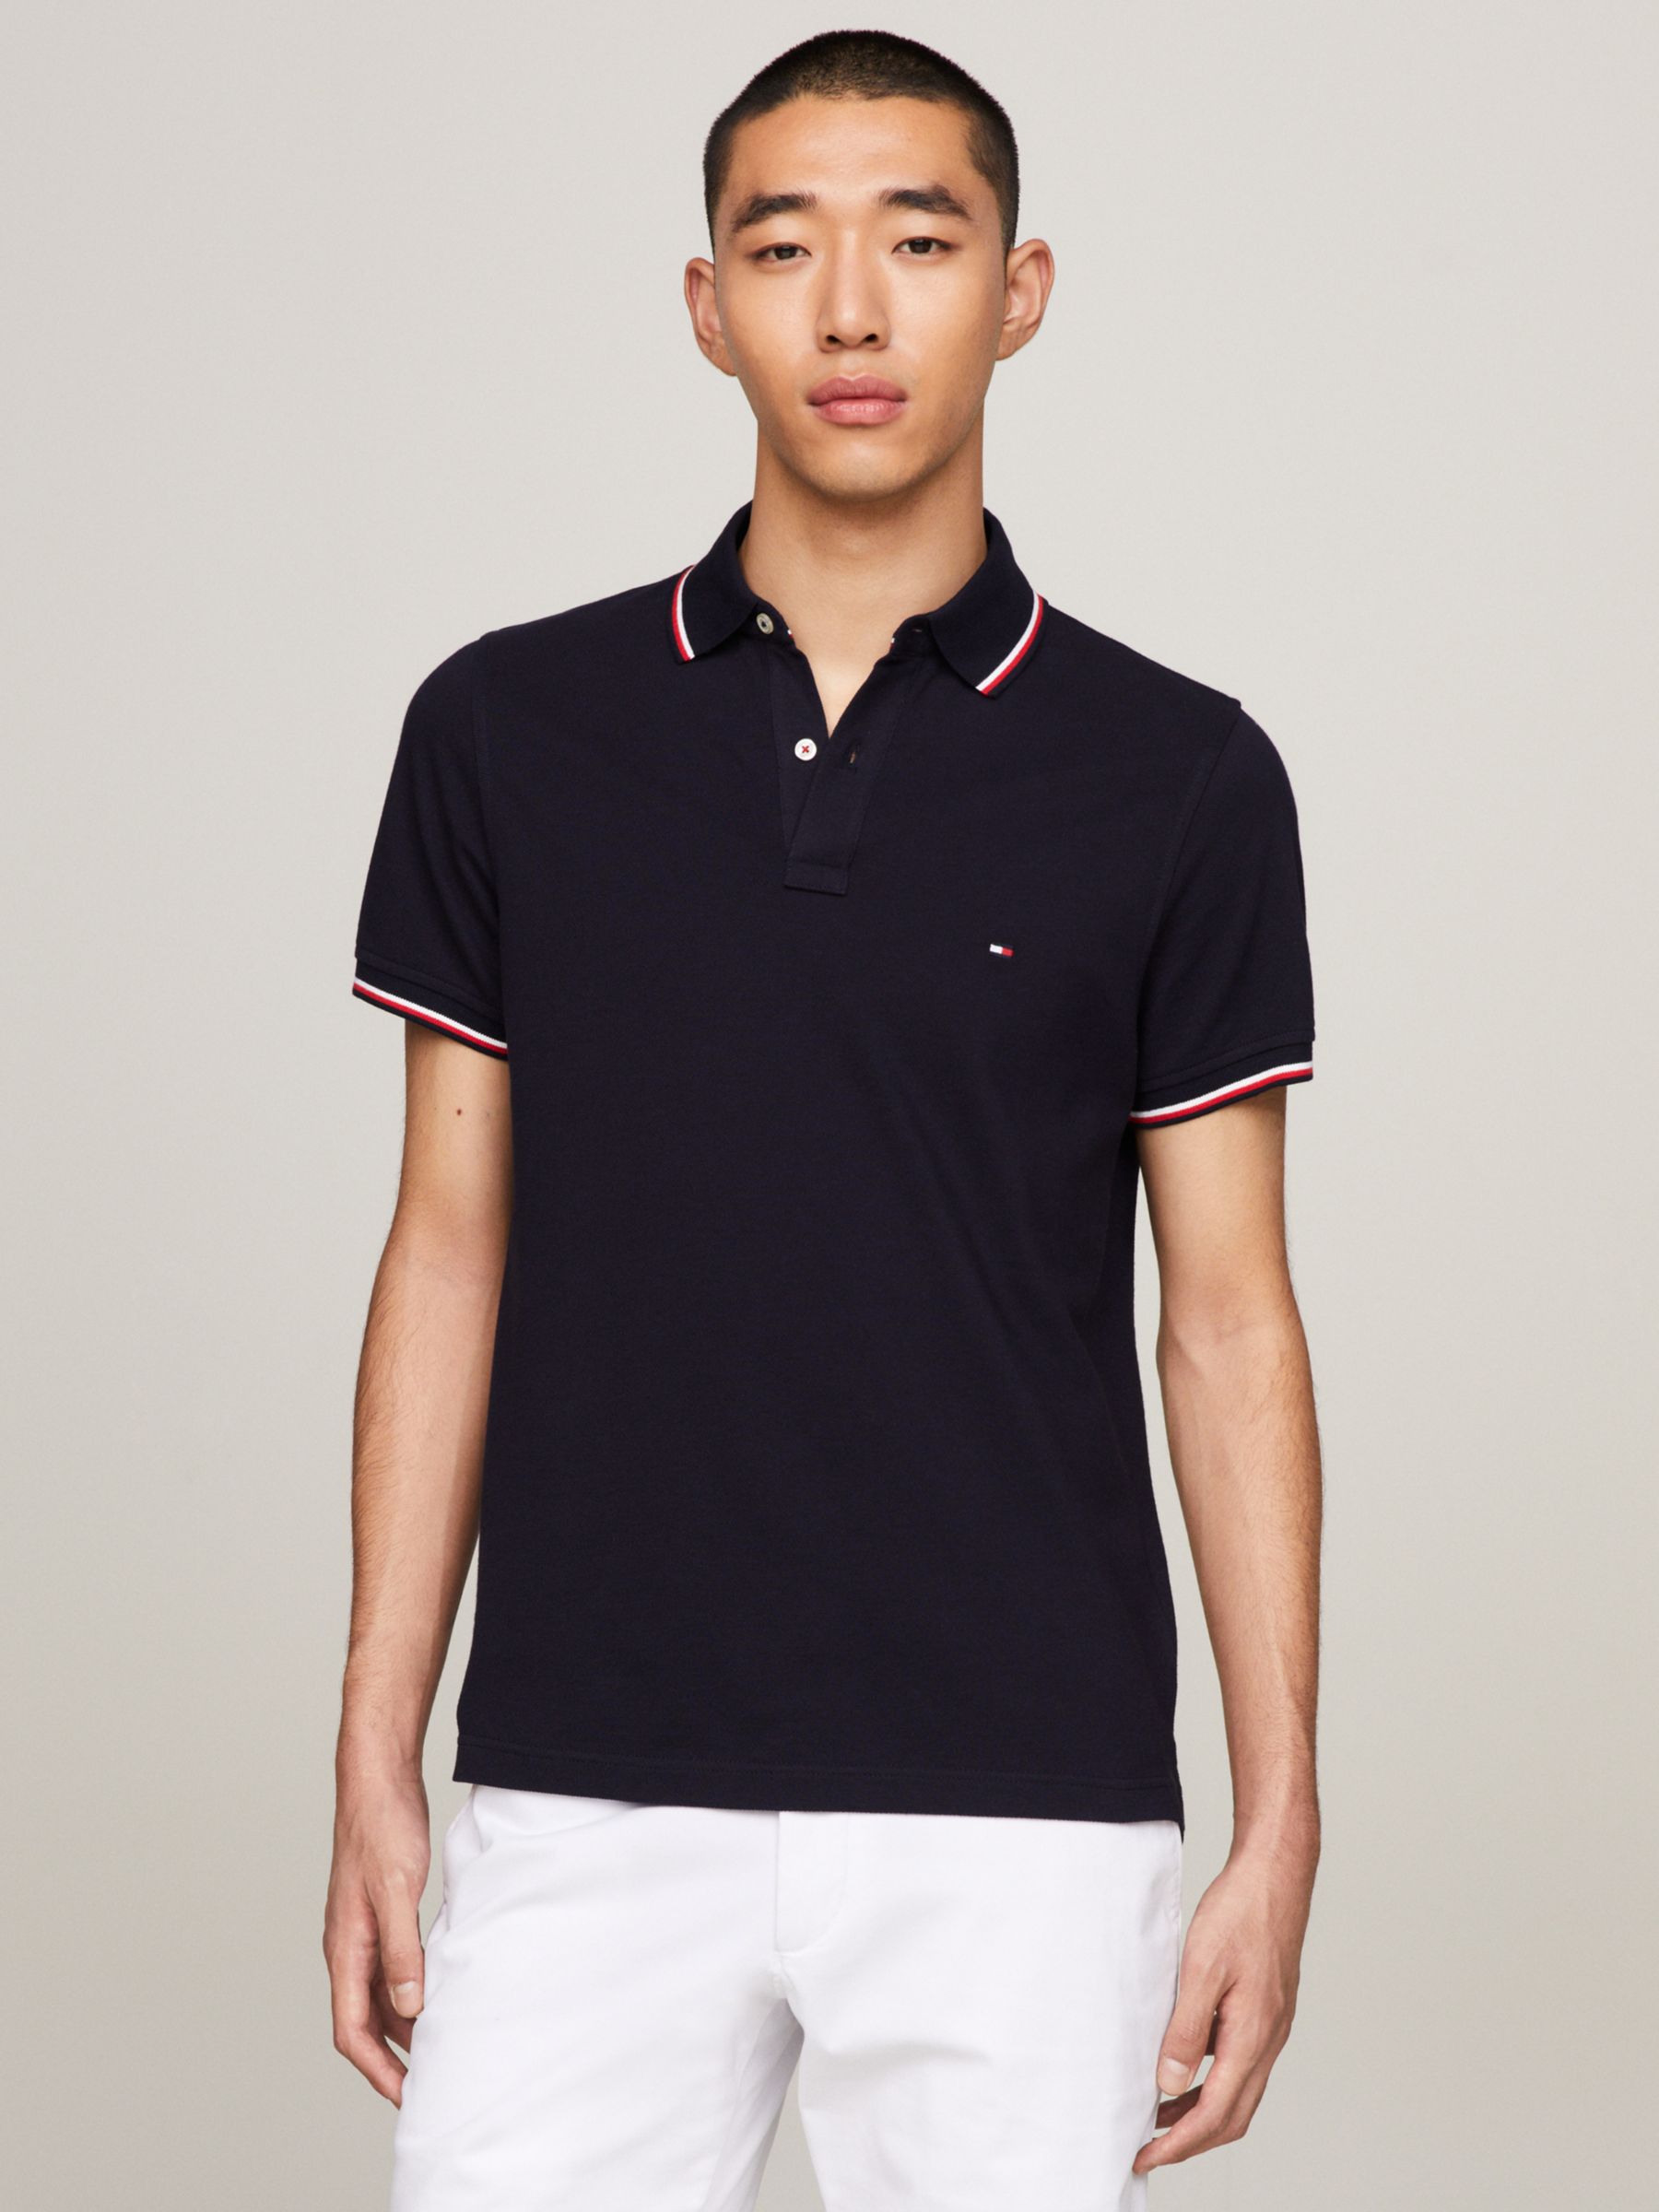 Tommy Hilfiger Tipped Organic Fit & Lewis John Desert Sky Cotton Slim Polo Shirt, Partners at